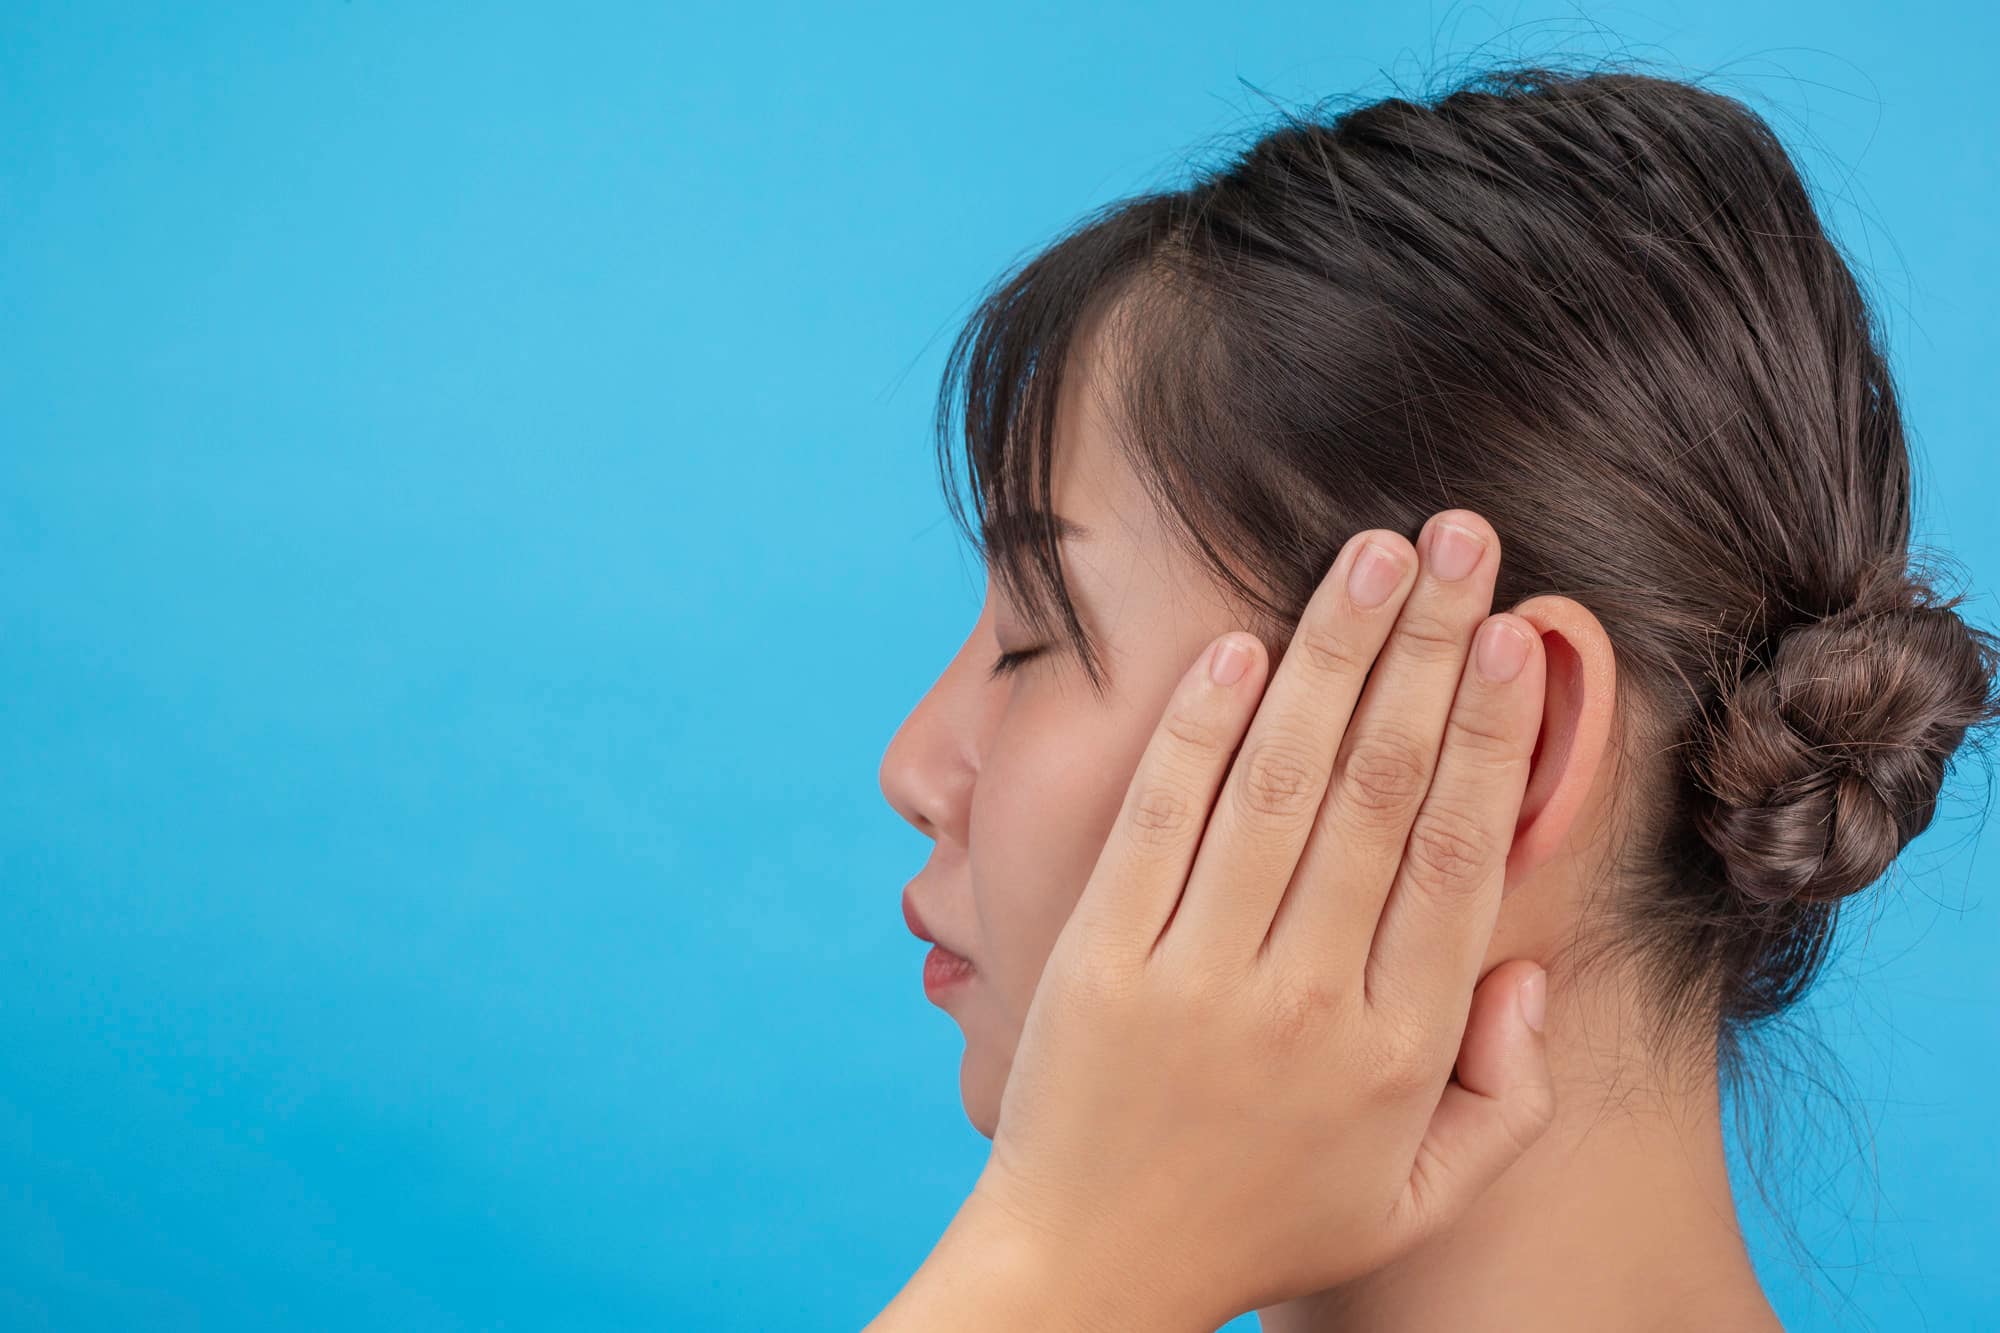 Ear pain : What you need to know?